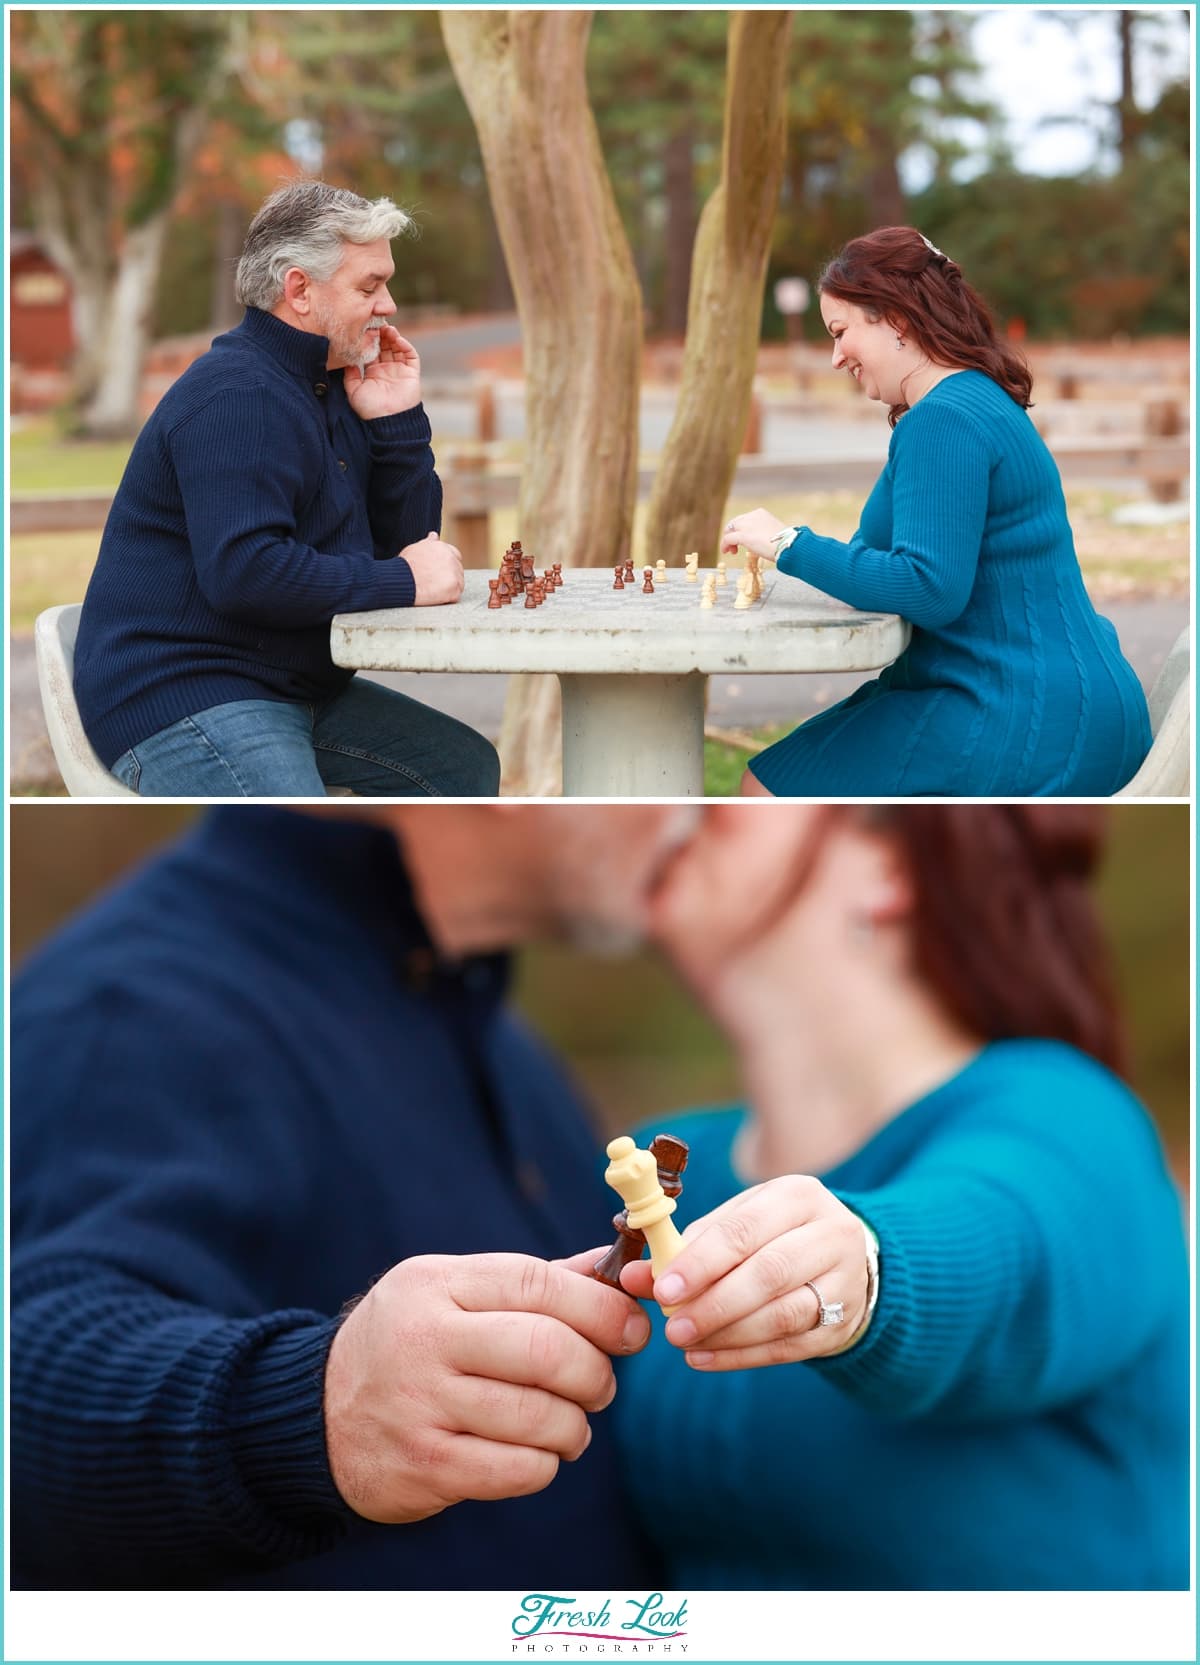 Playing Chess at Engagement Photoshoot